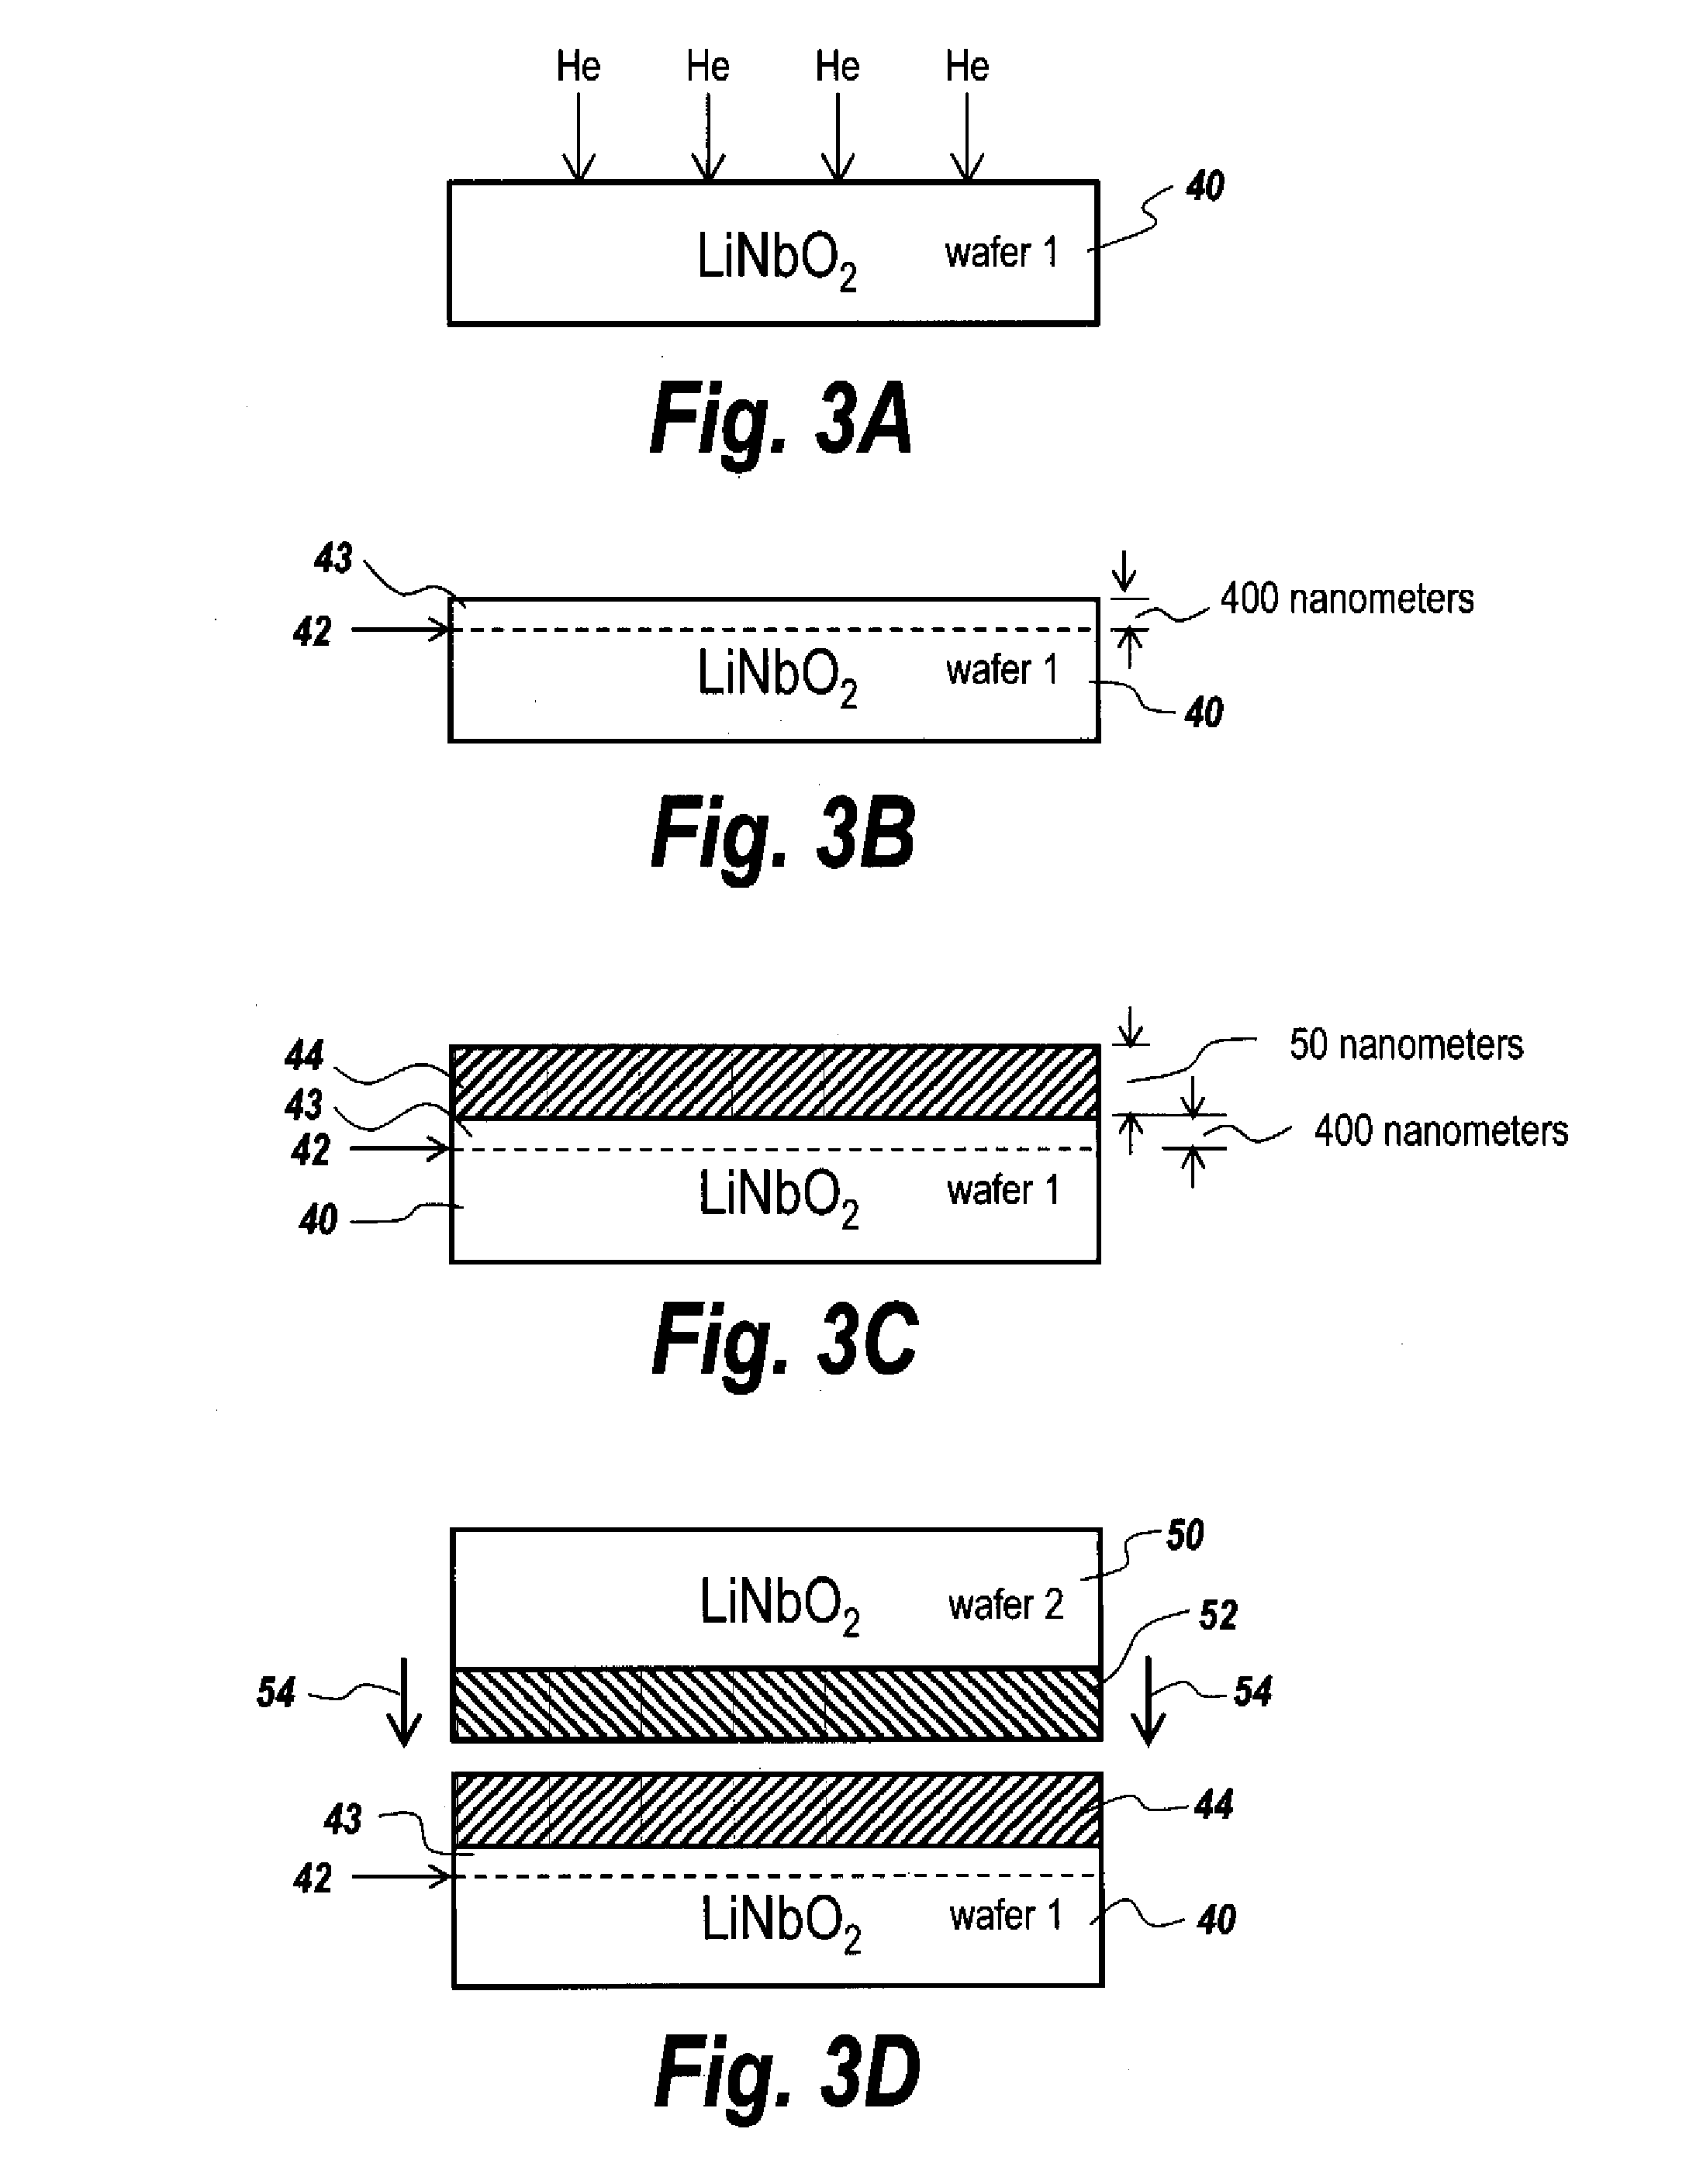 Optical Phased Array Using Stacked Parallel Plate Wave Guides And Method Of Fabricating Arrays Of Stacked Parallel Plate Waveguides